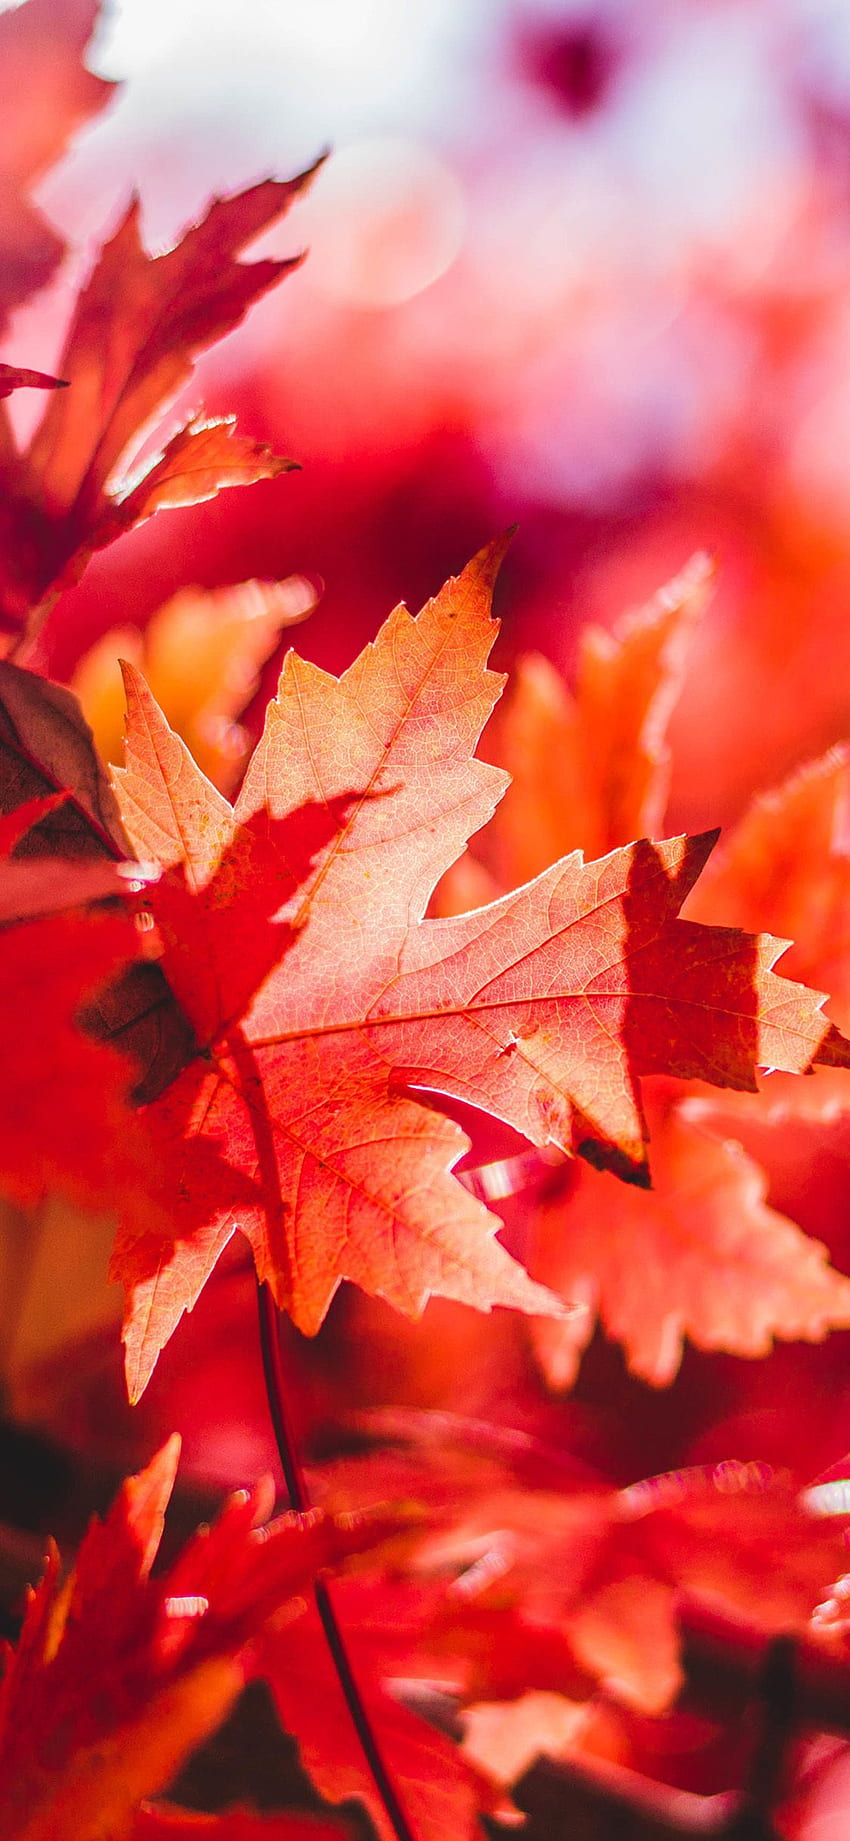 Maple Leaf Flower Red Fall Fall Nature Via For IPhone X. Autumn Nature, Fall, Autumn graphy วอลล์เปเปอร์โทรศัพท์ HD